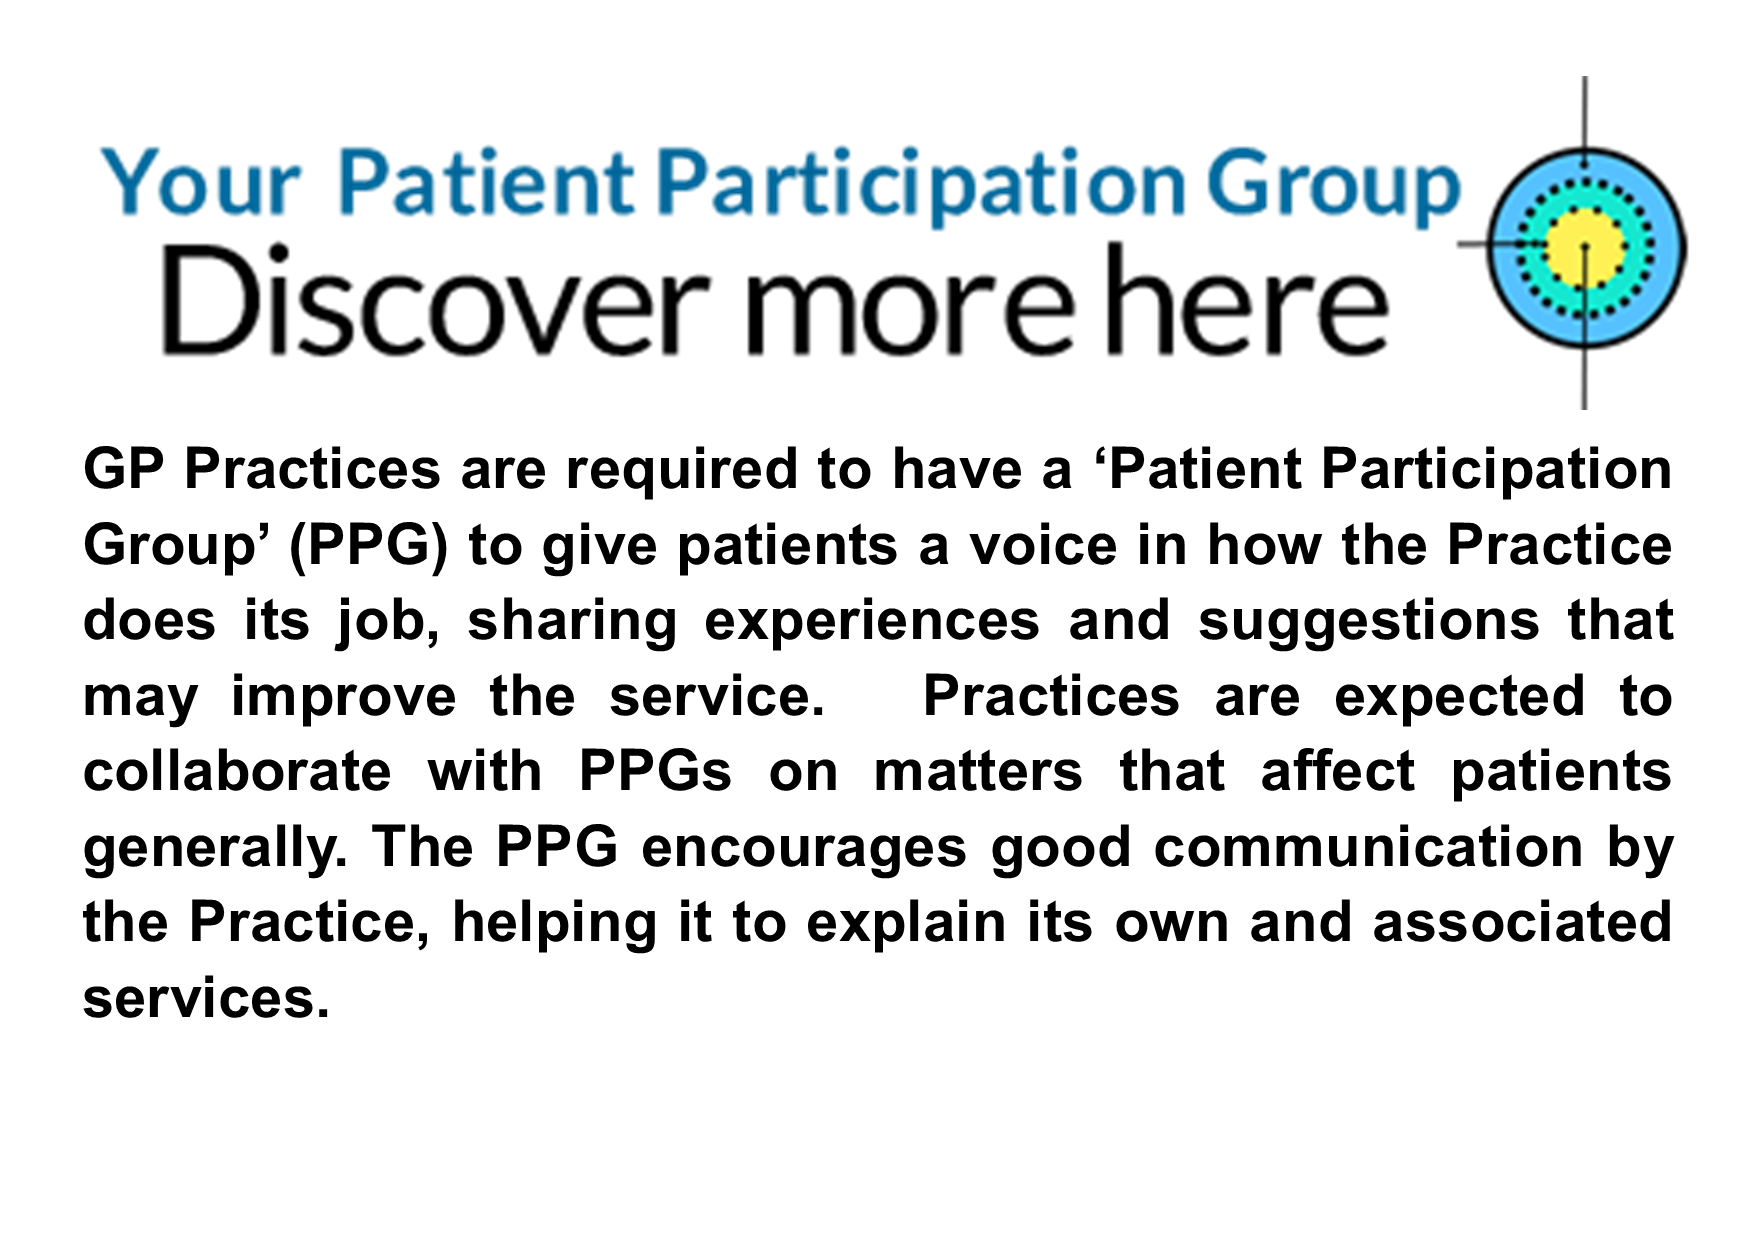 Your Participation Group with PPG logo.  GP Practices are required to have a ‘Patient Participation Group’ (PPG) to give patients a voice in how the Practice does its job, sharing experiences and suggestions that may improve the service. Practices are expected to collaborate with PPGs on matters that affect patients generally. The PPG encourages good communication by the Practice, helping it to explain its own and associated services. Discover more here